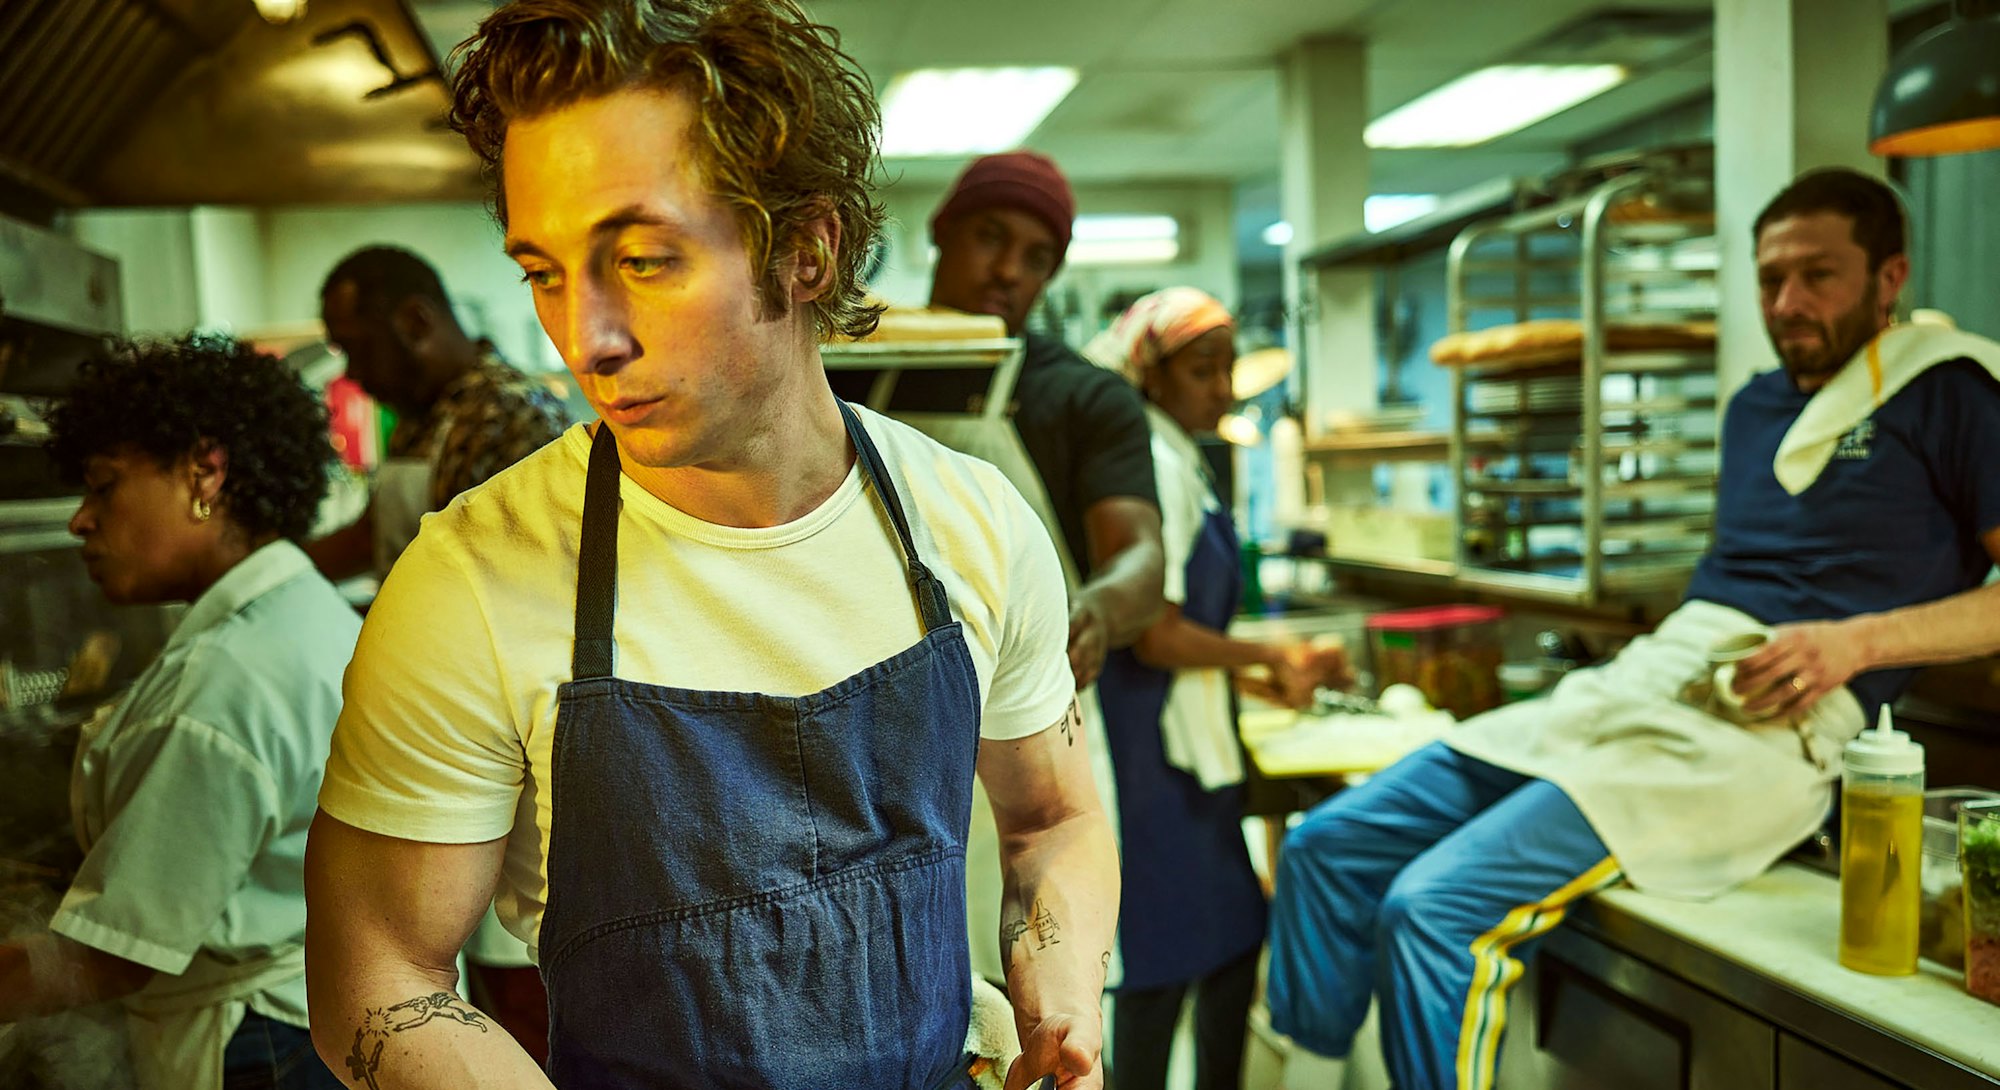 20 Photos Of "Beefy" Jeremy Allen White To Tempt You To Watch 'The Bear' On FX & Hulu